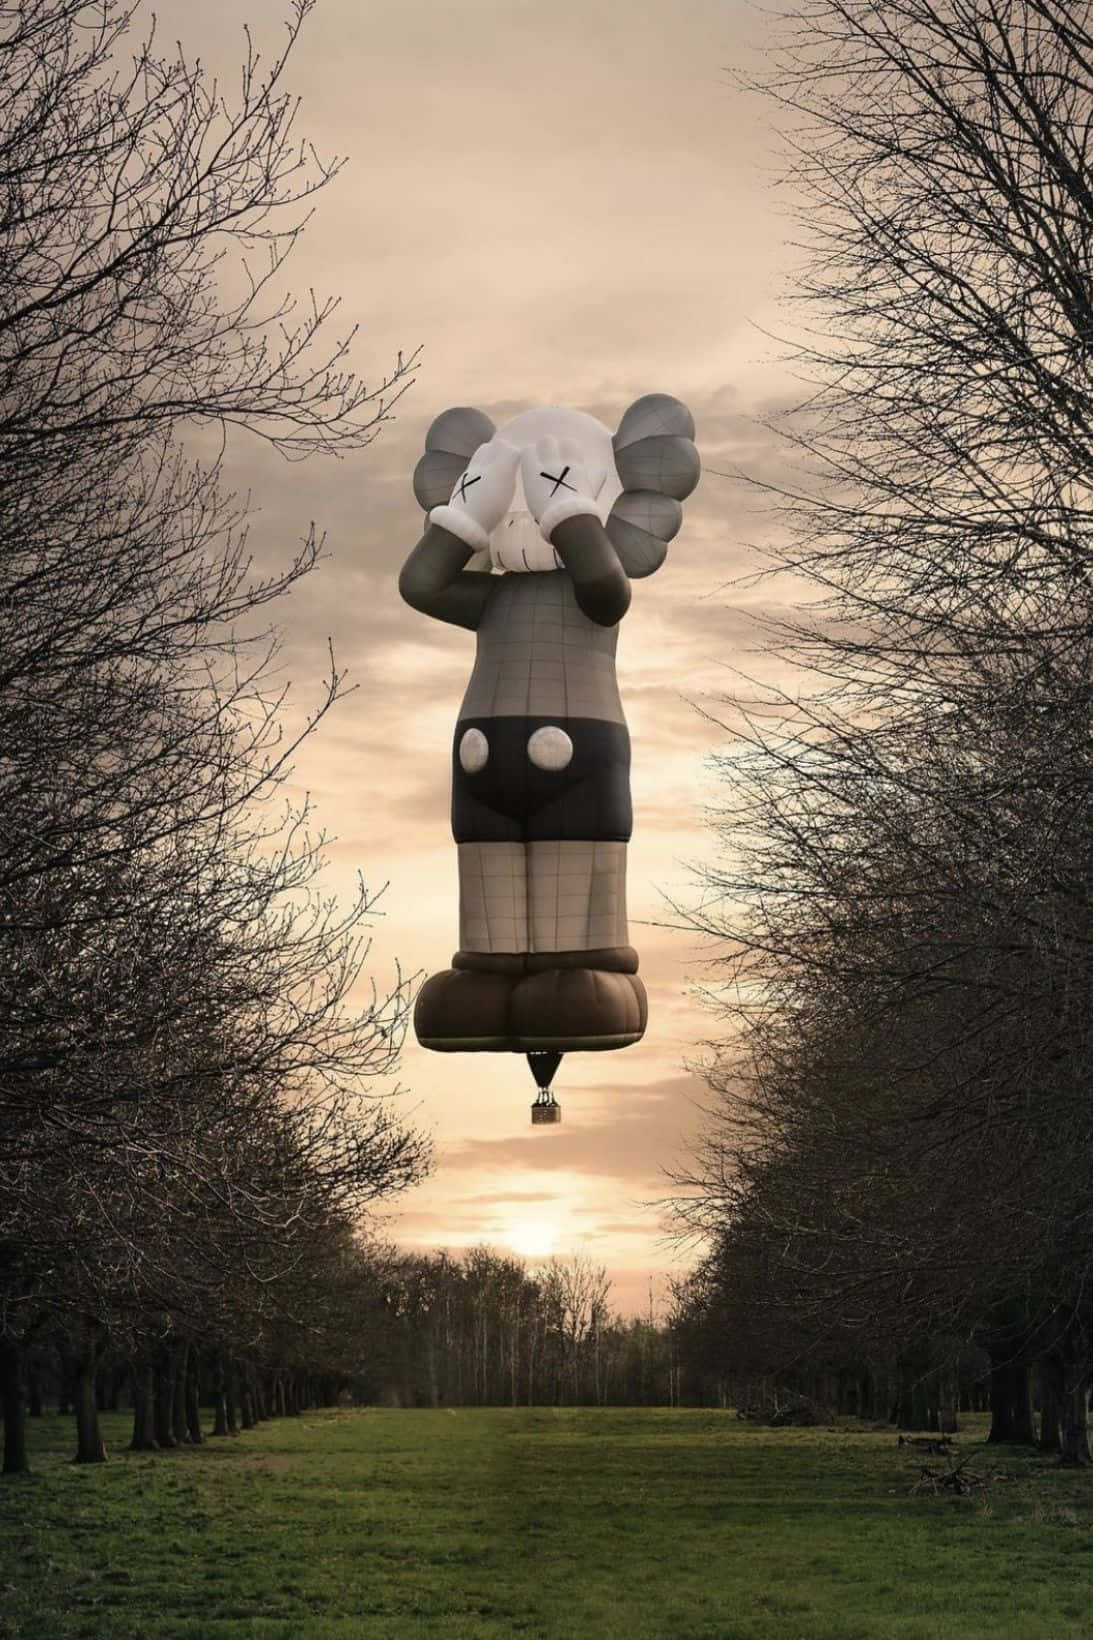 Kaws Holiday Art Exhibition in Nature Wallpaper